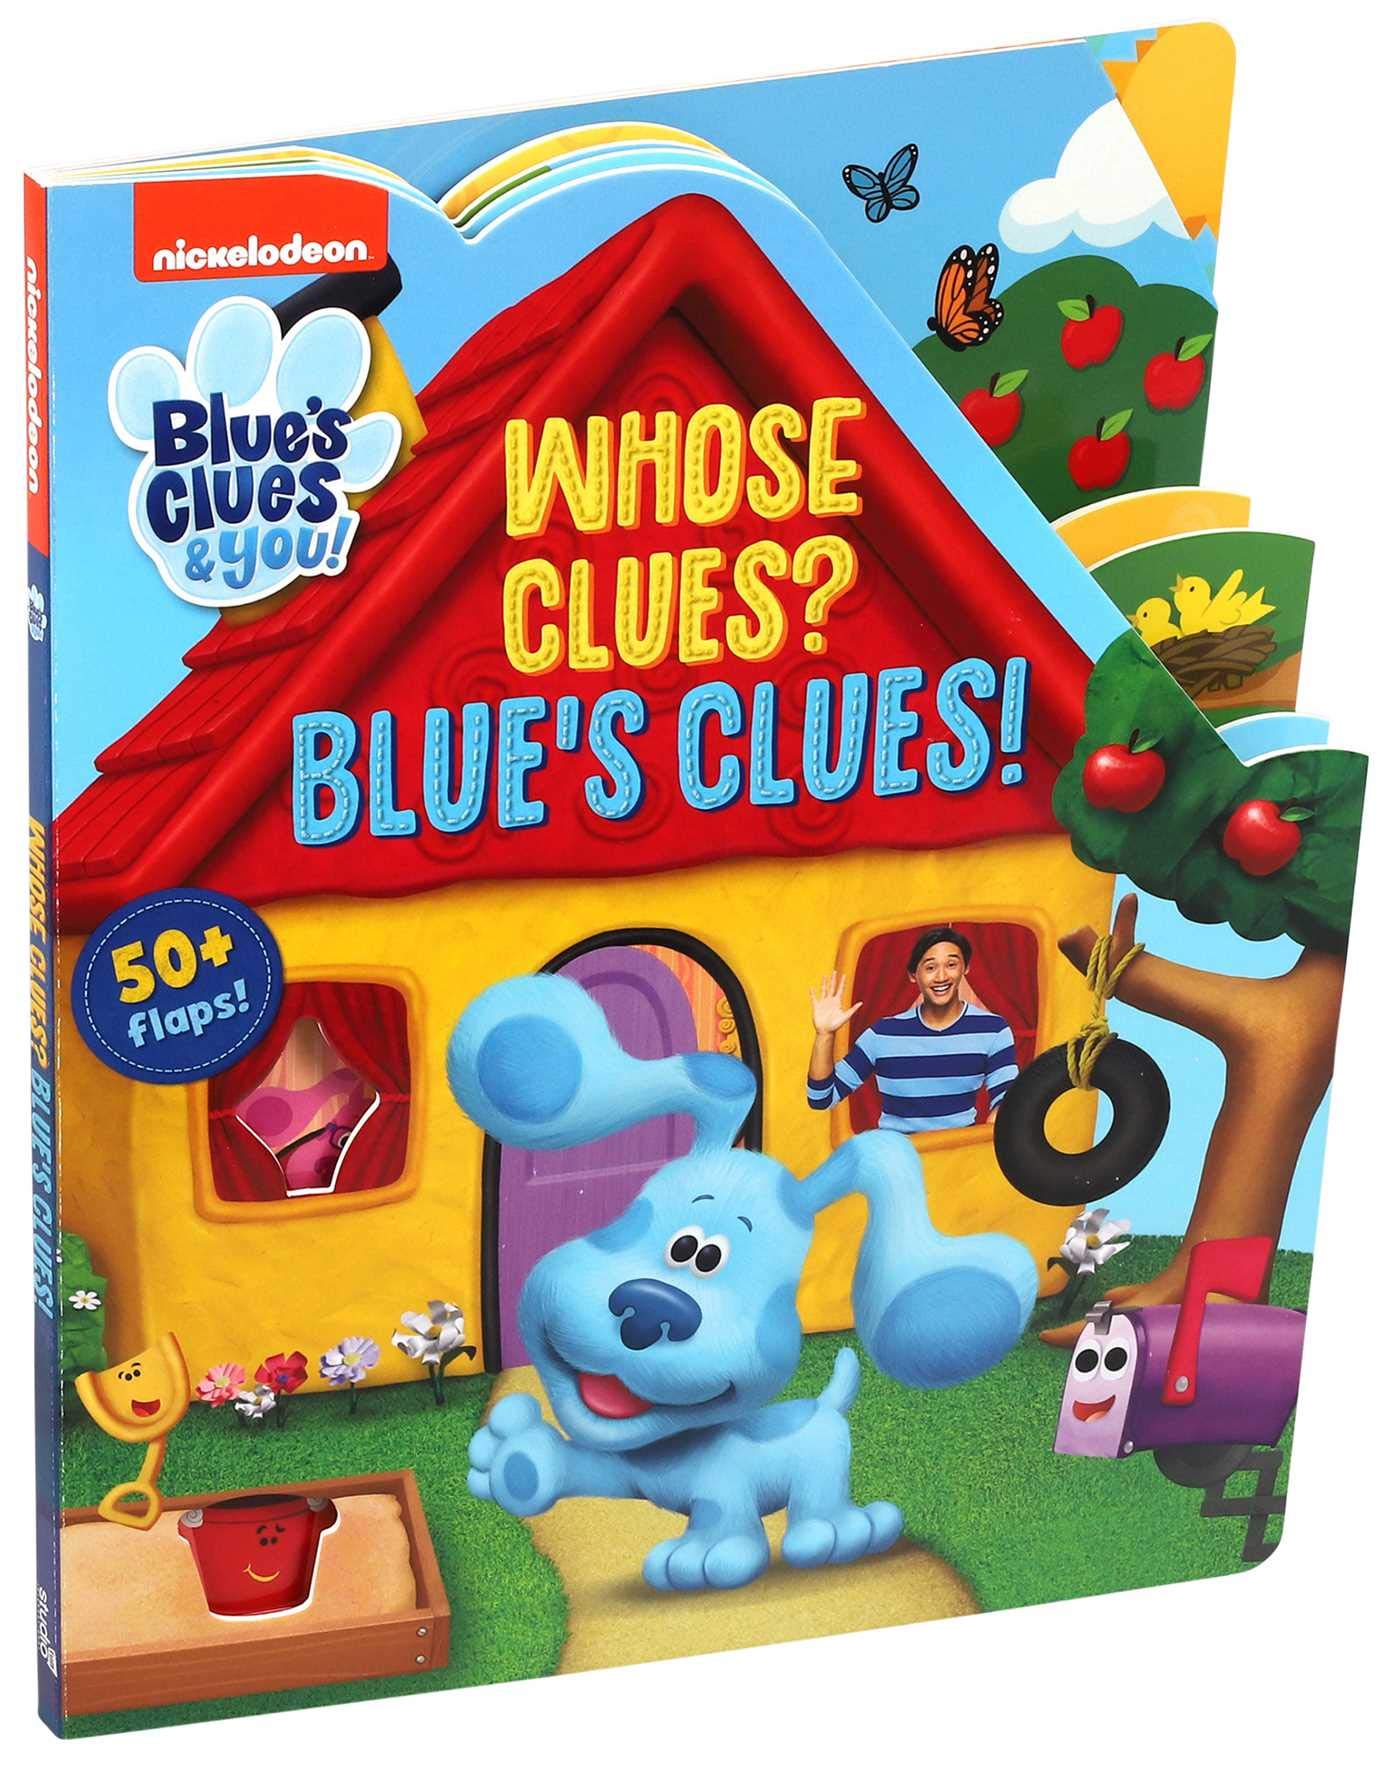 Nickelodeon Blues Clues & You! Whose Clues? Blues Clues!